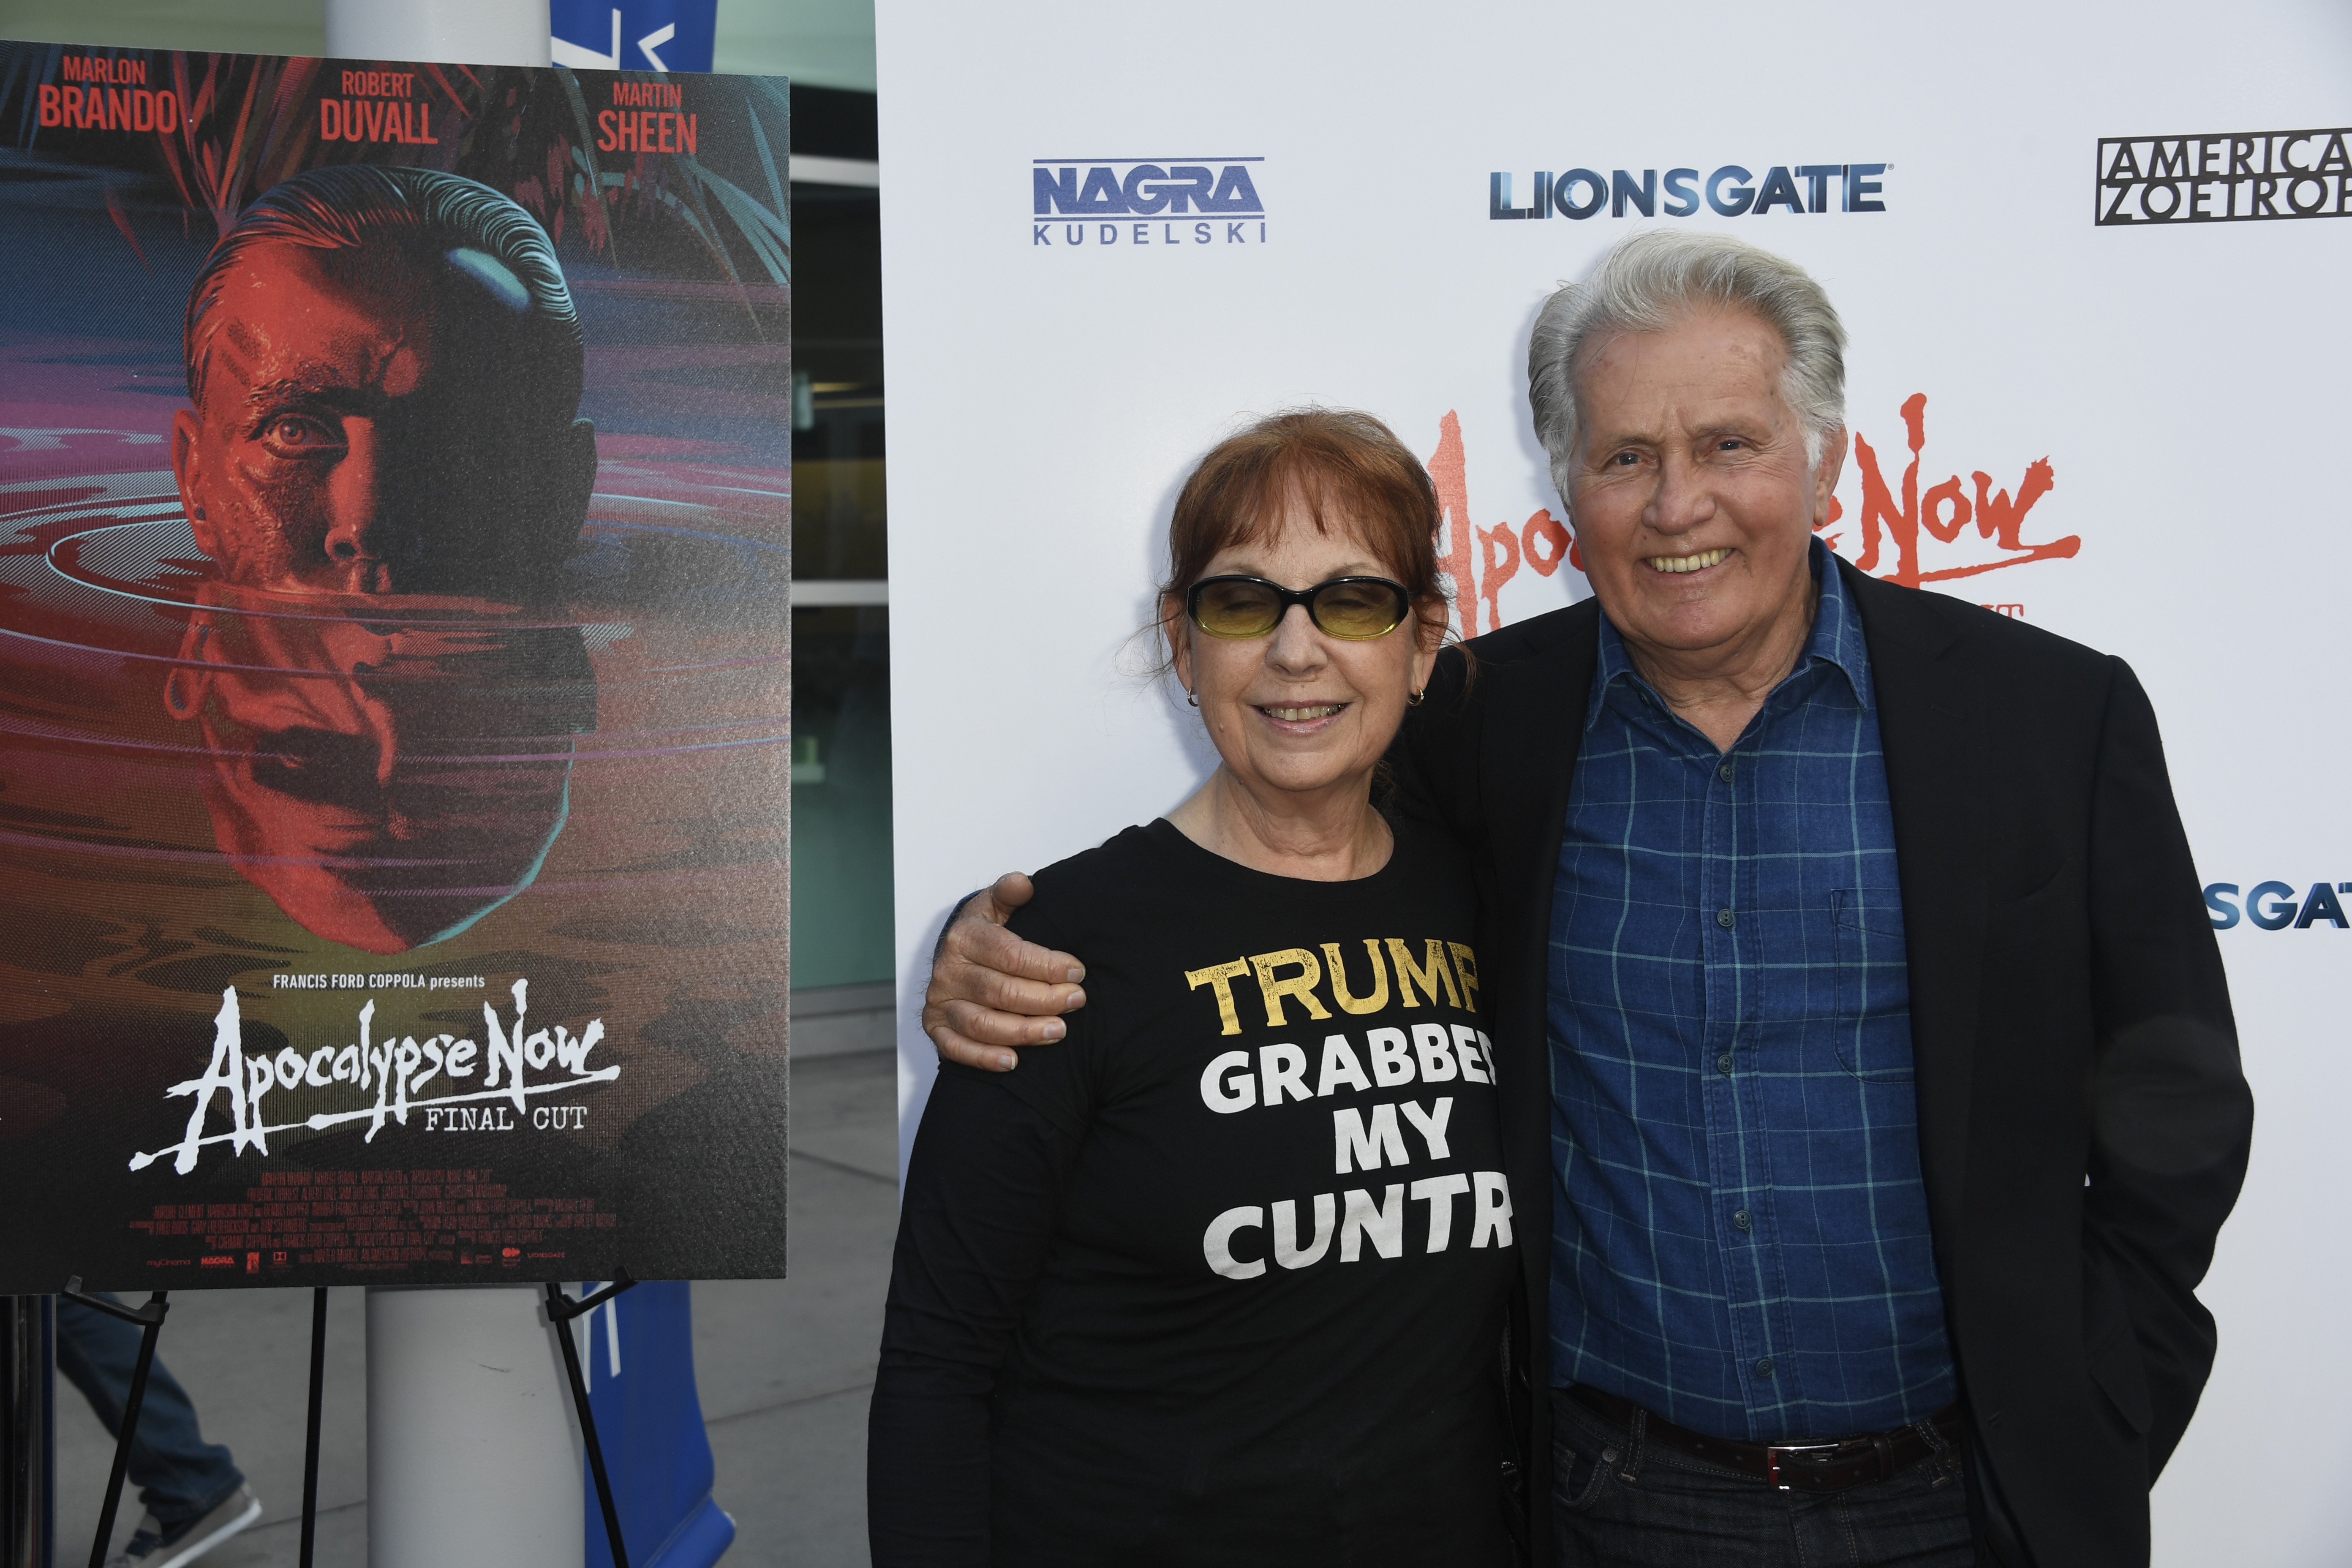 Actress Janet Sheen and Martin Sheen during the LA premiere of "Apocalypse Now Final Cut" at ArcLight Cinerama Dome on August 12, 2019 in Hollywood, California. / Source: Getty Images